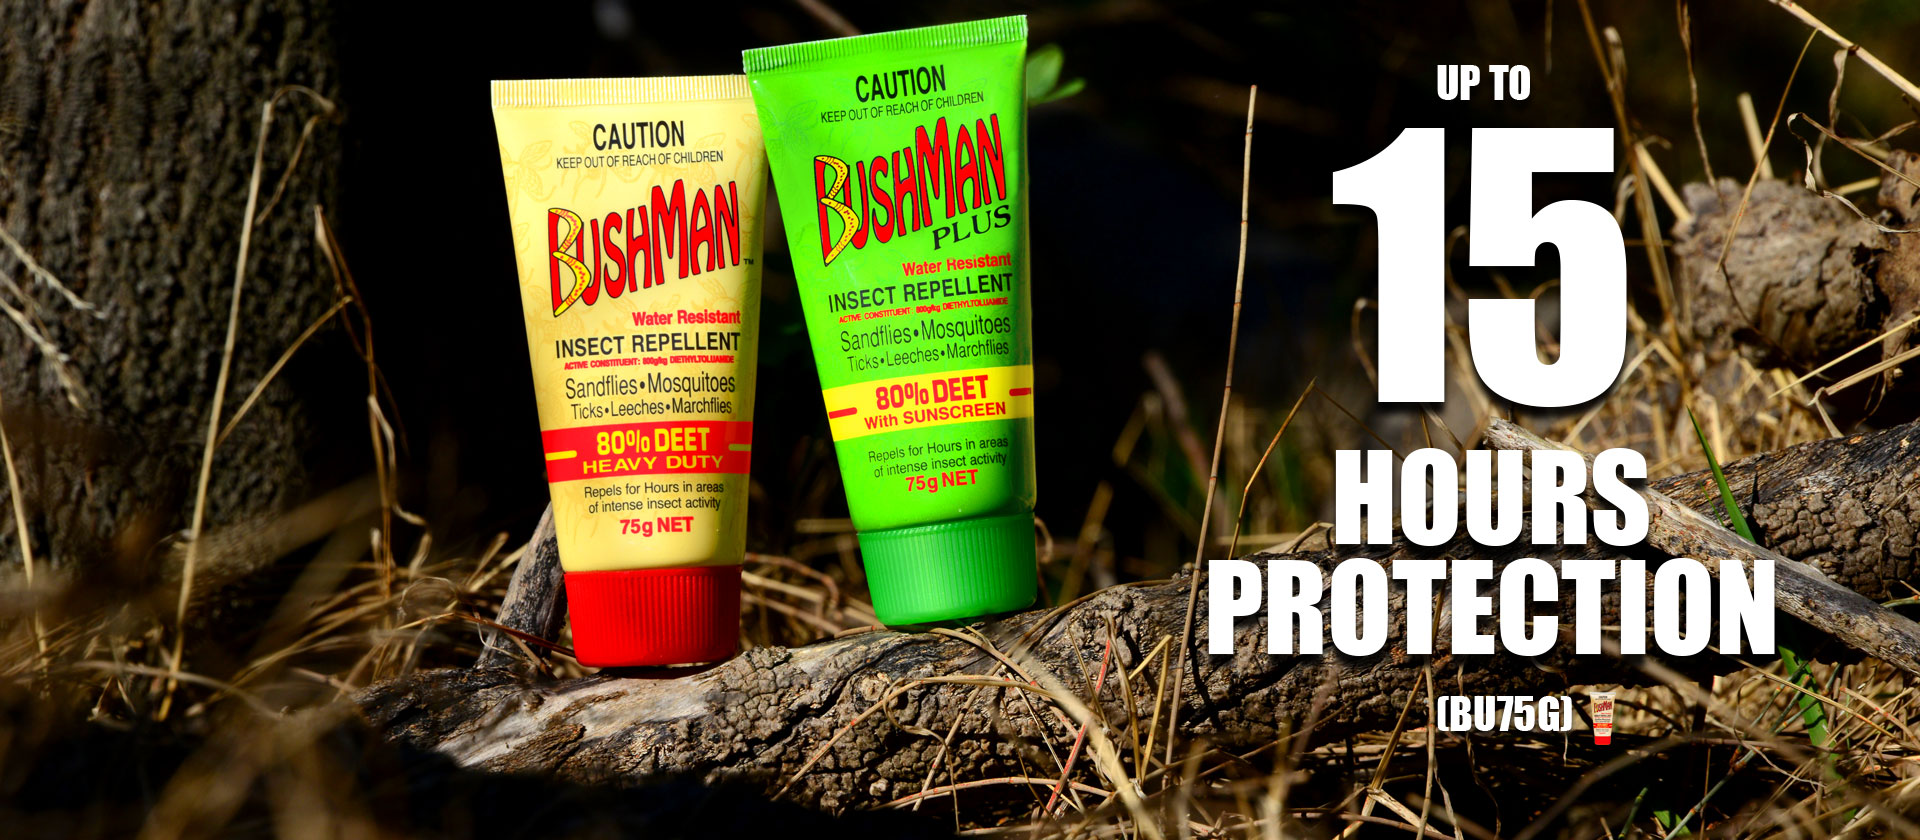 Bushman has up to 15 hour protection